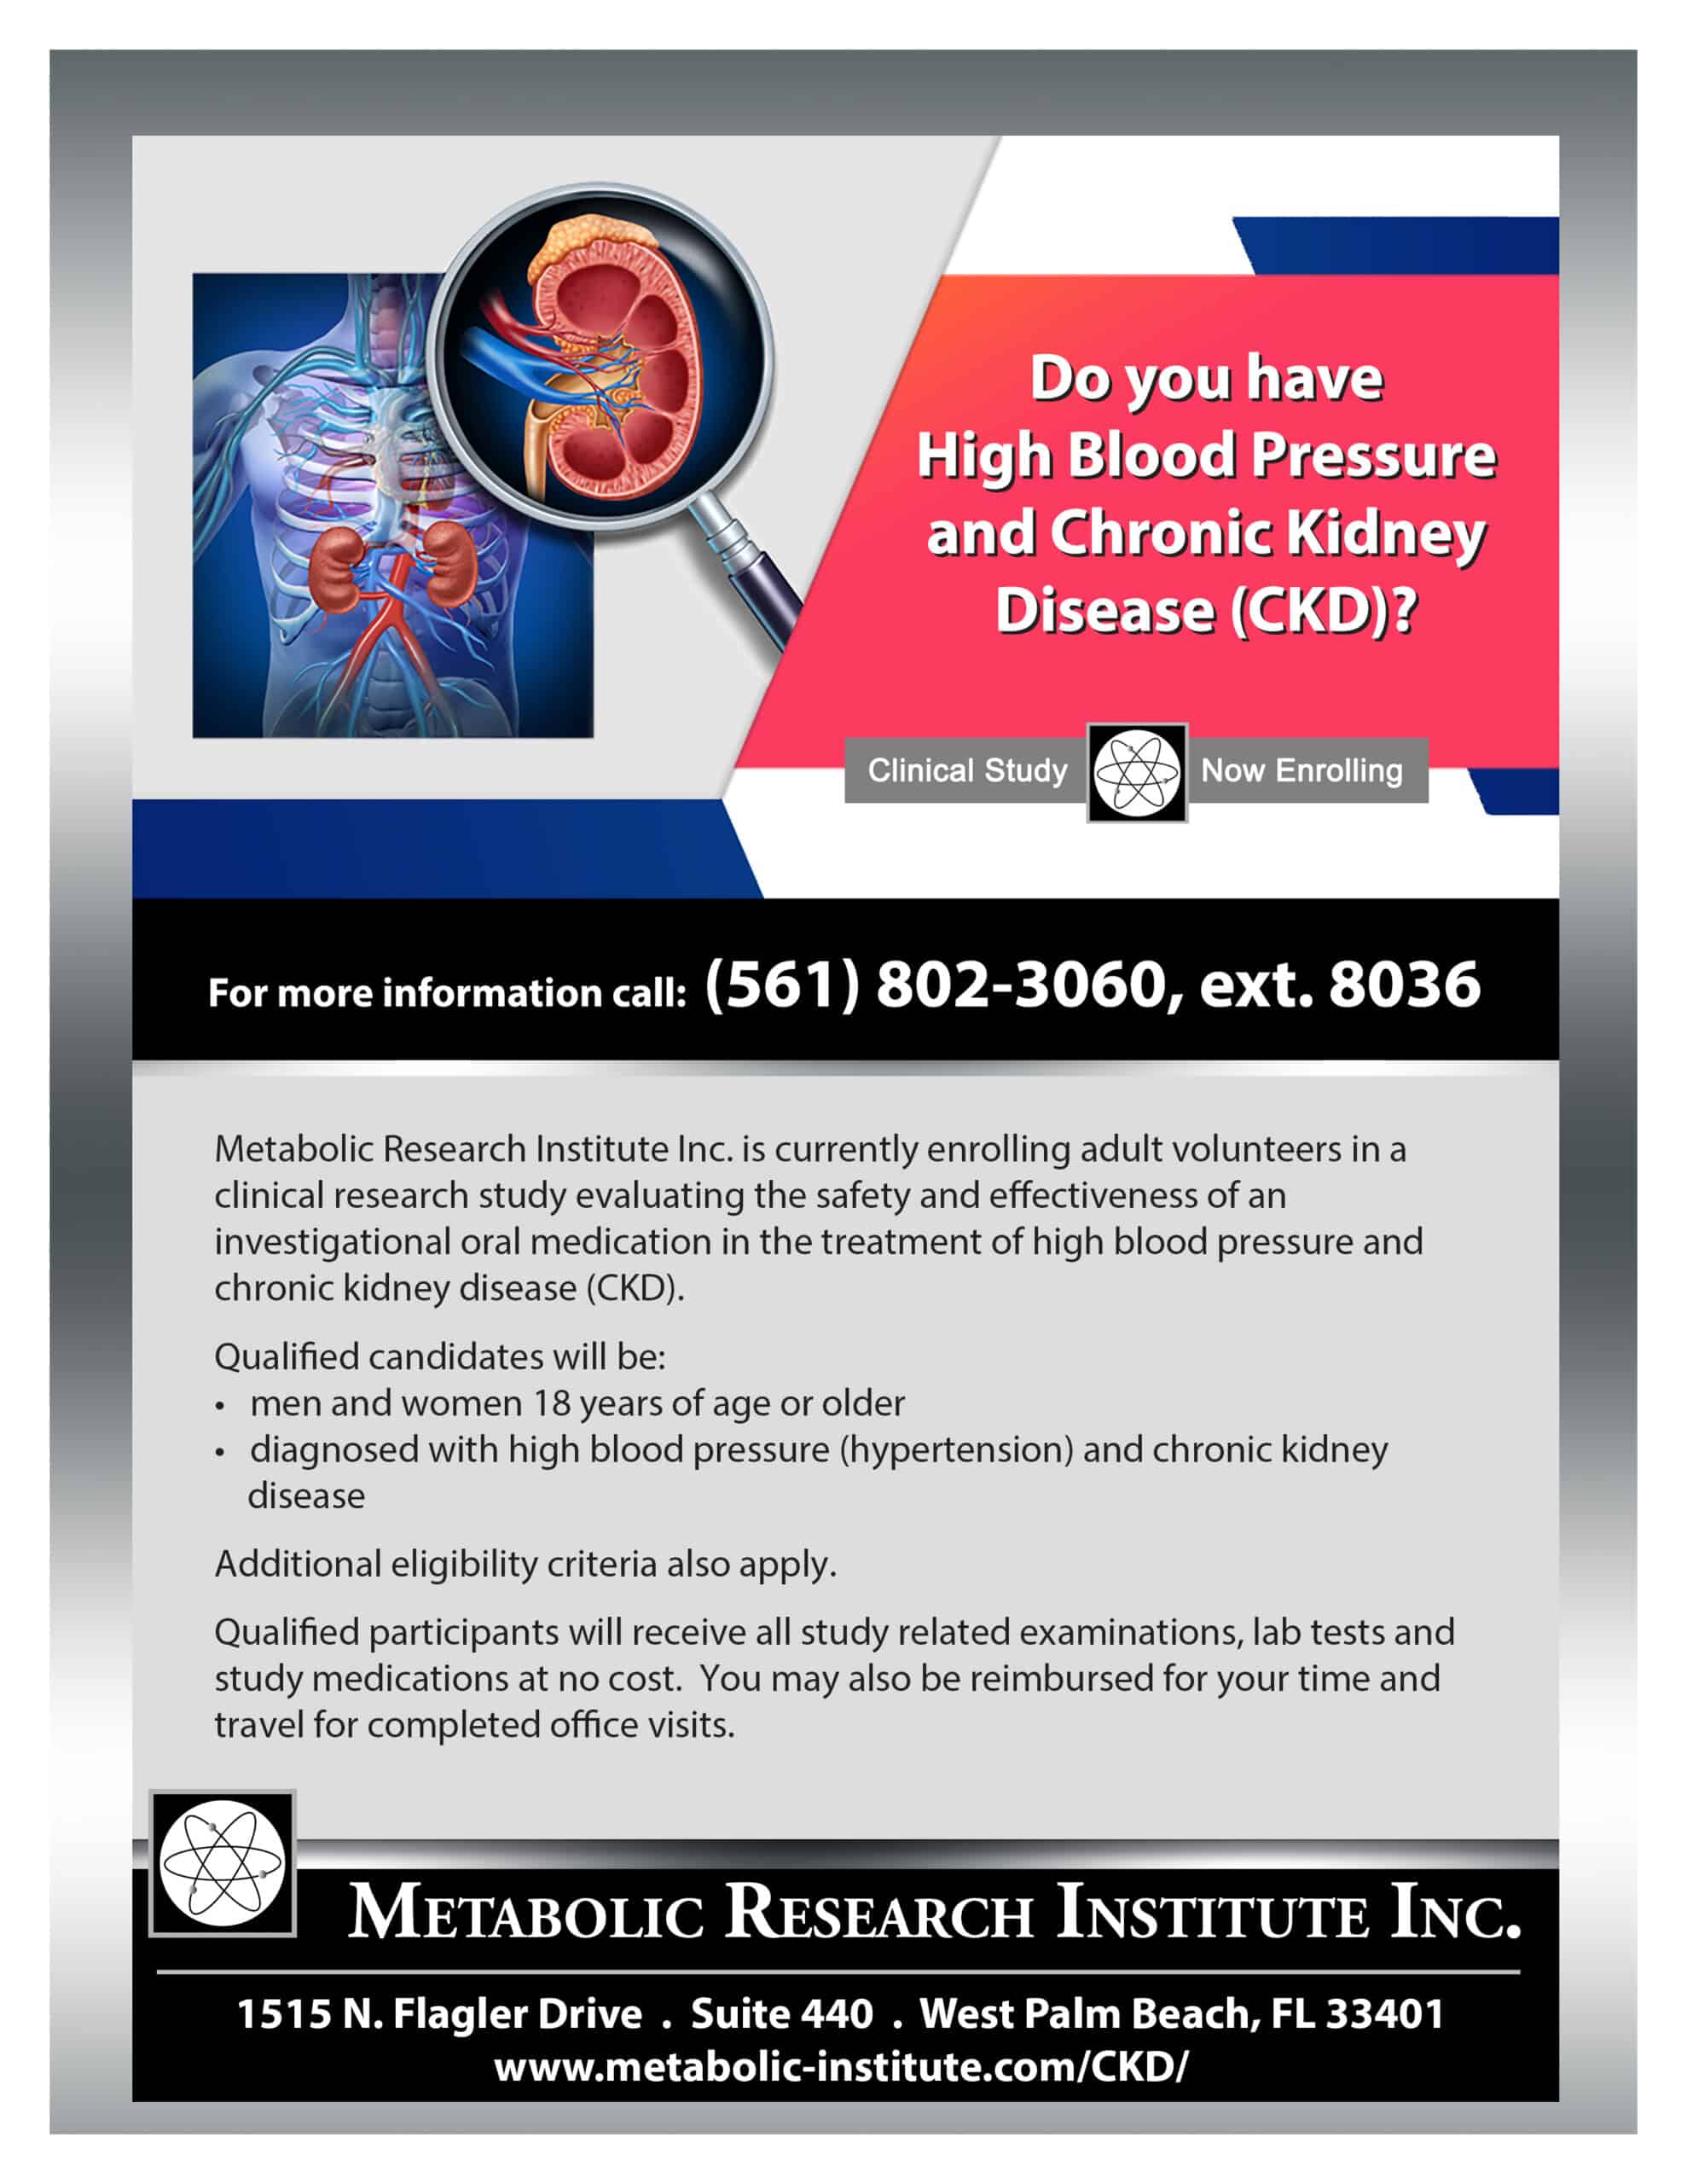 High Blood Pressure and Chronic Kidney Disease Clinical Study Flyer